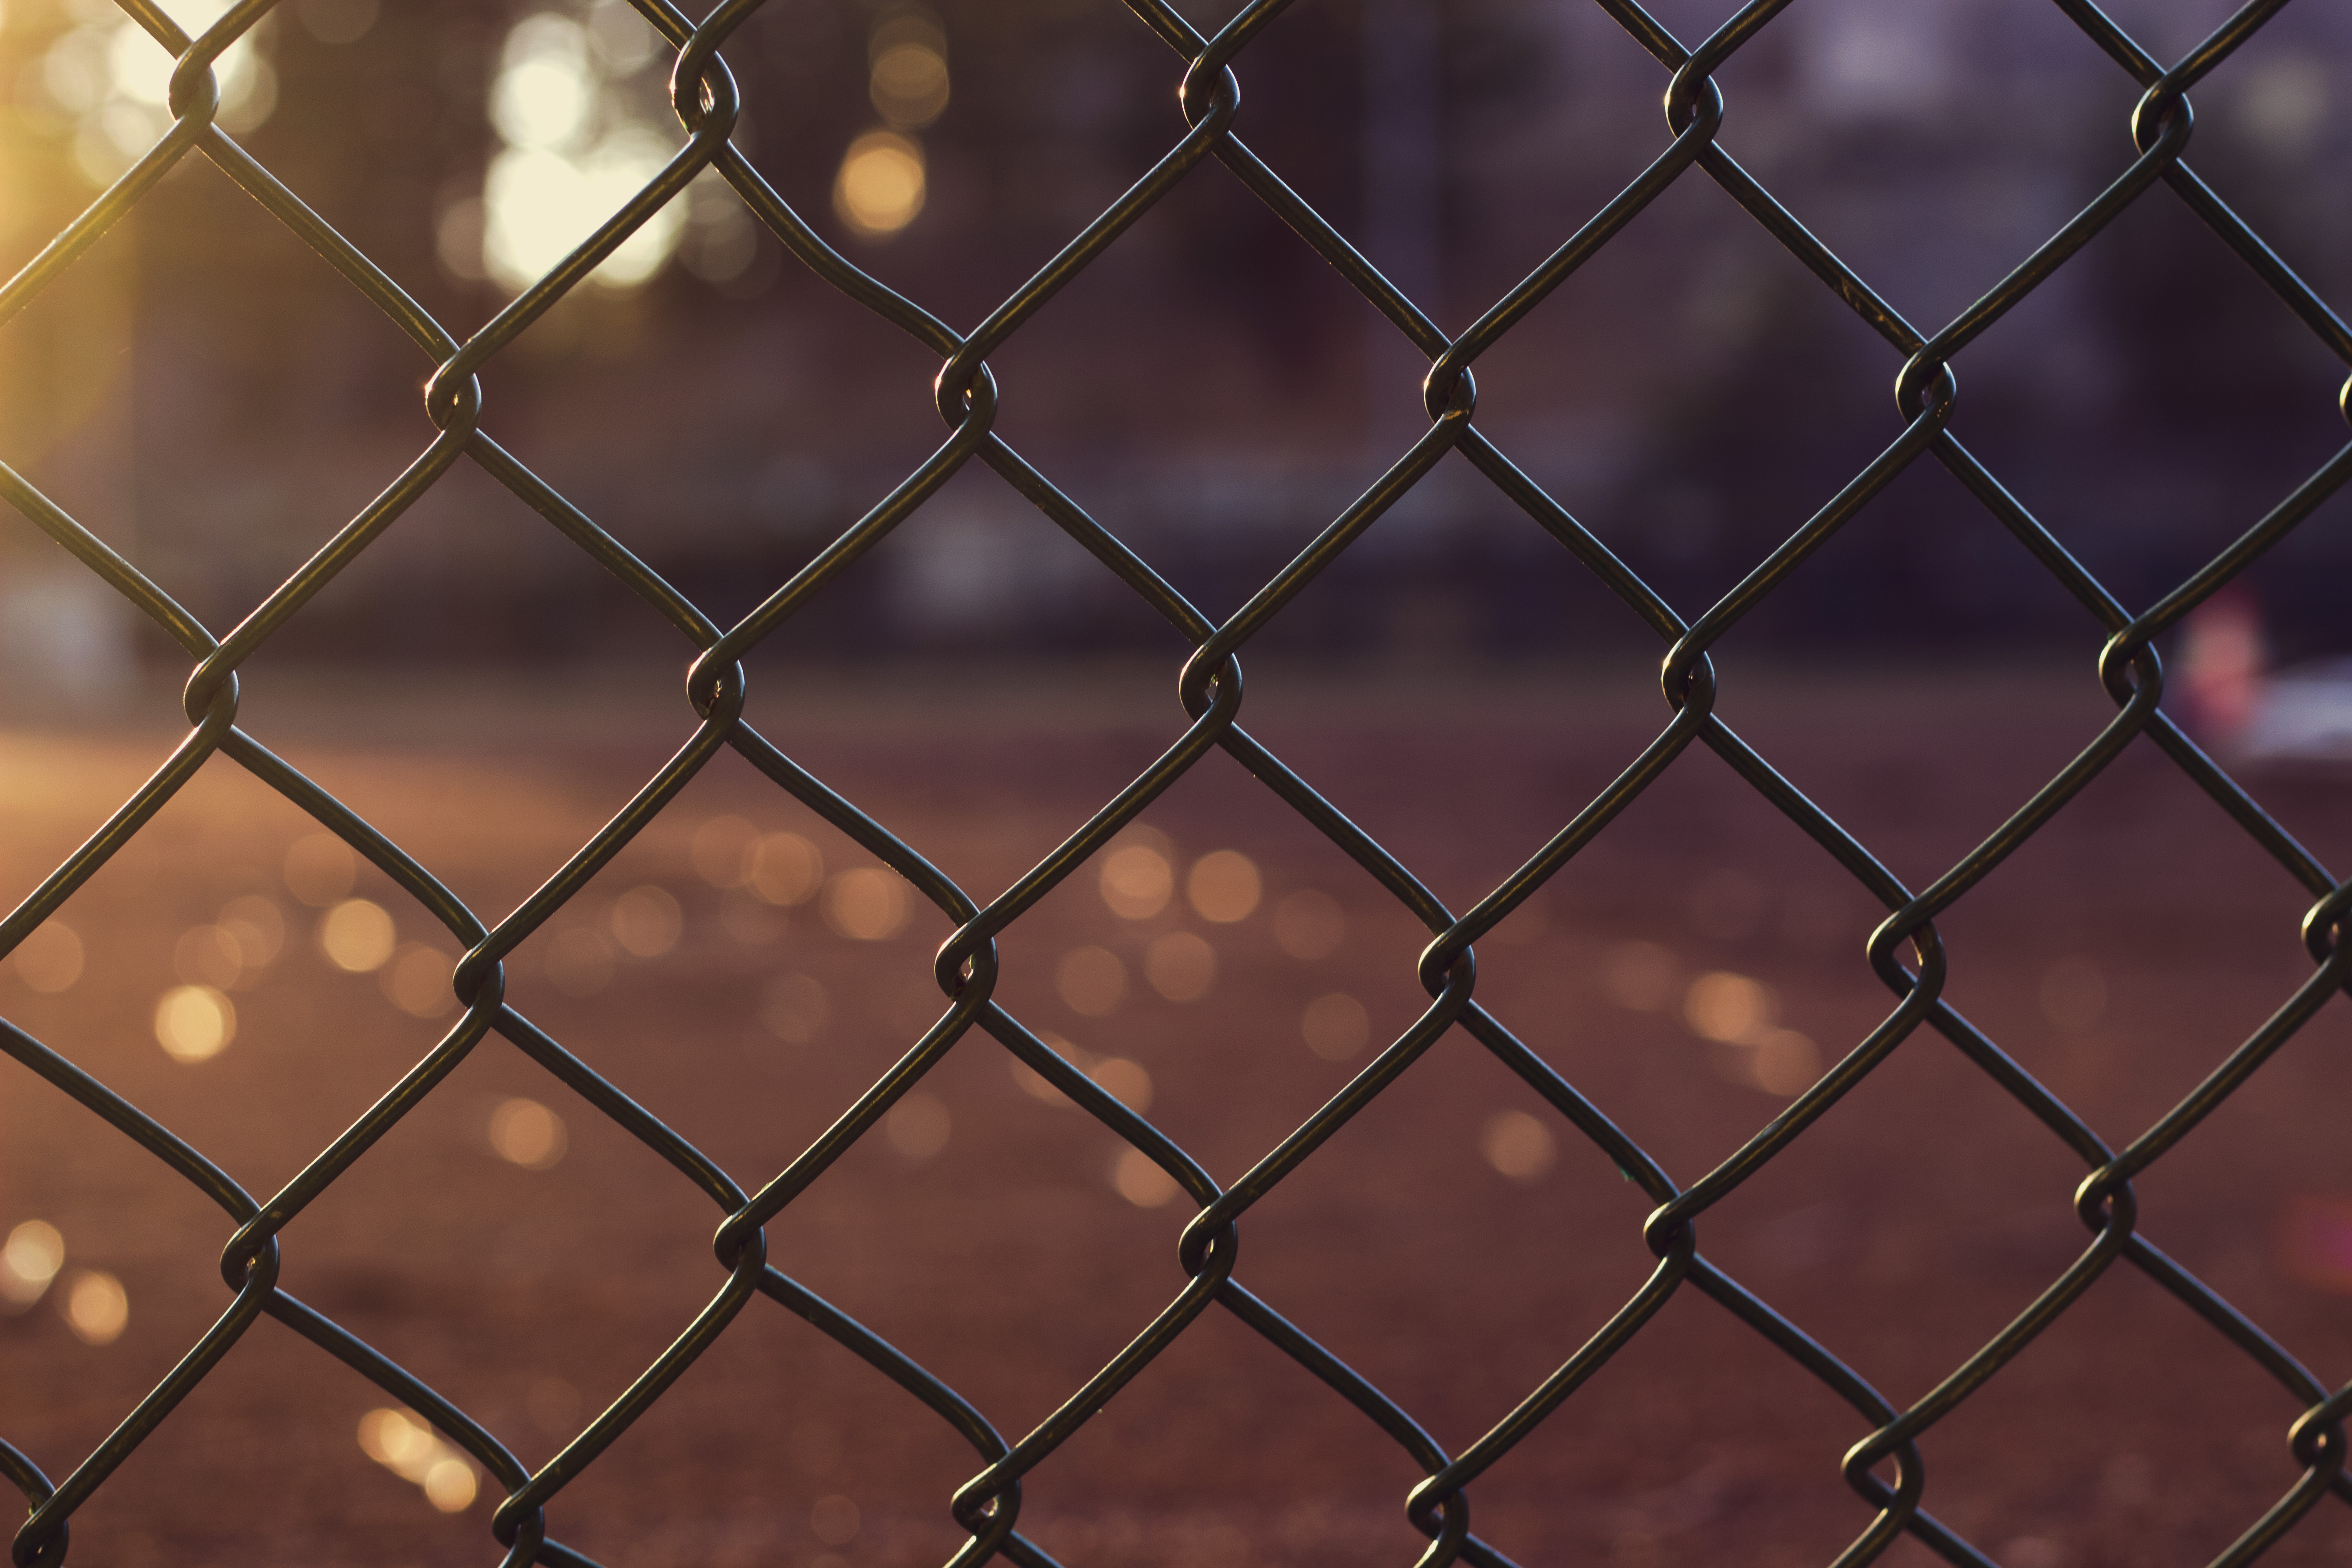 Popular Fence Image for Phone